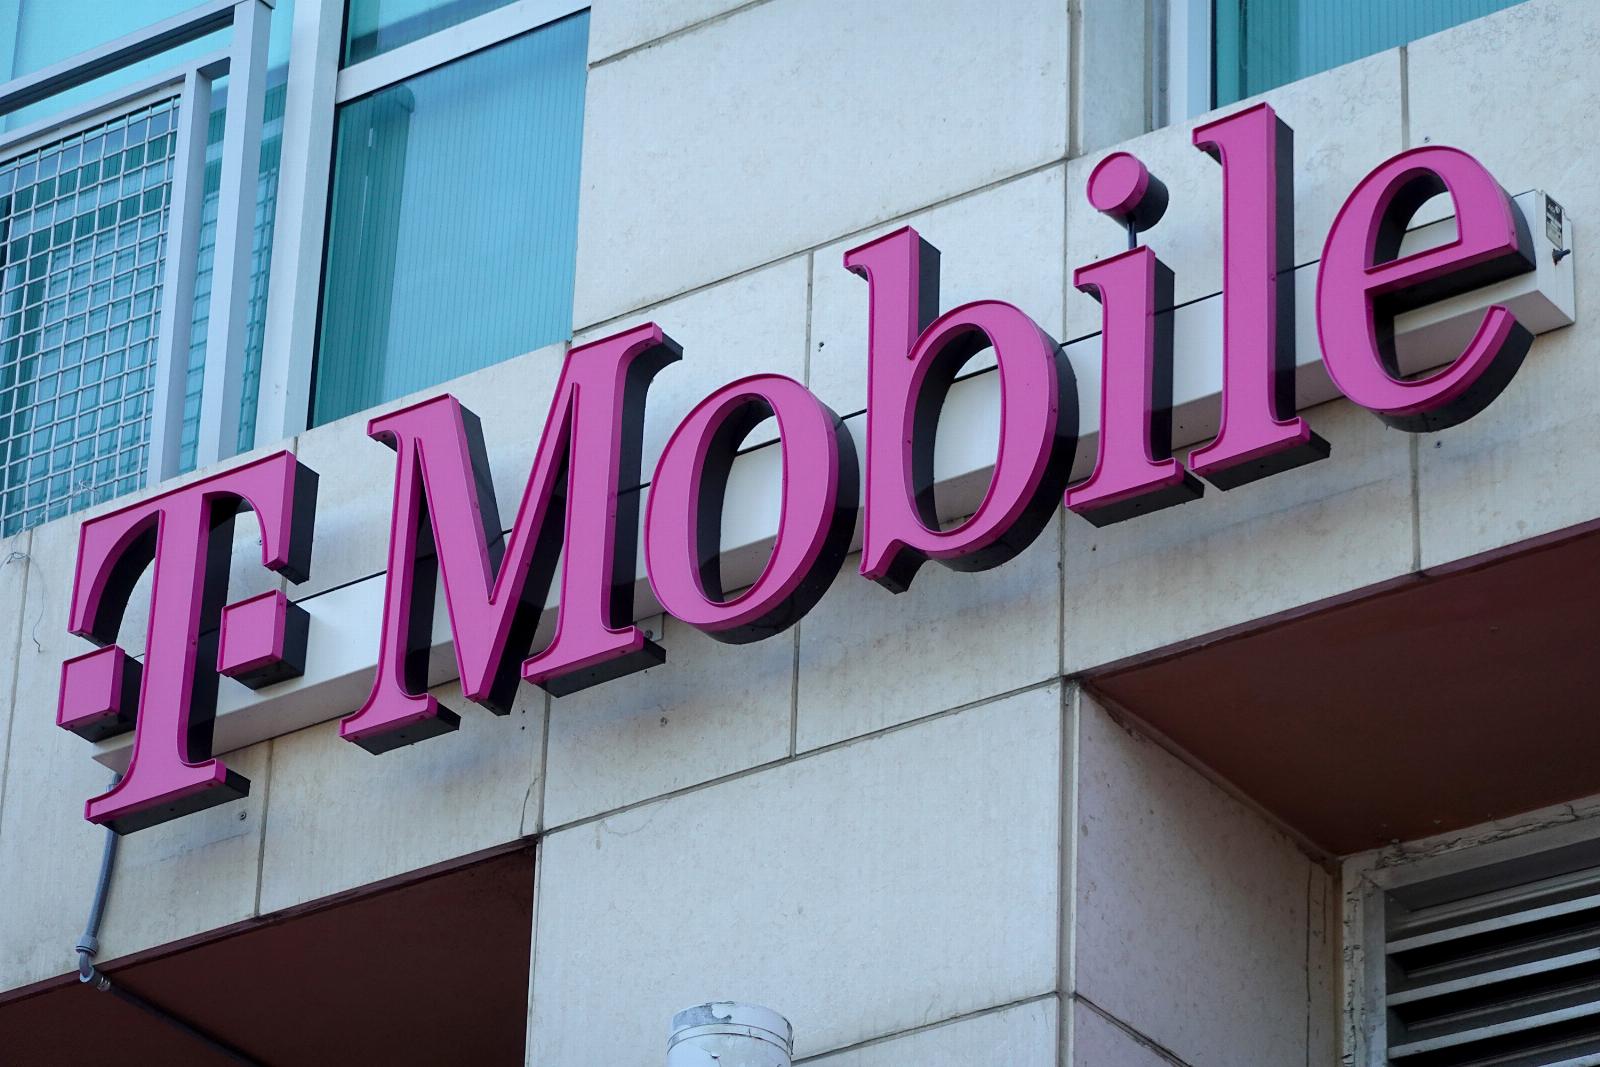 T-Mobile to acquire Ryan Reynolds’ Mint Mobile in $1.35 billion deal